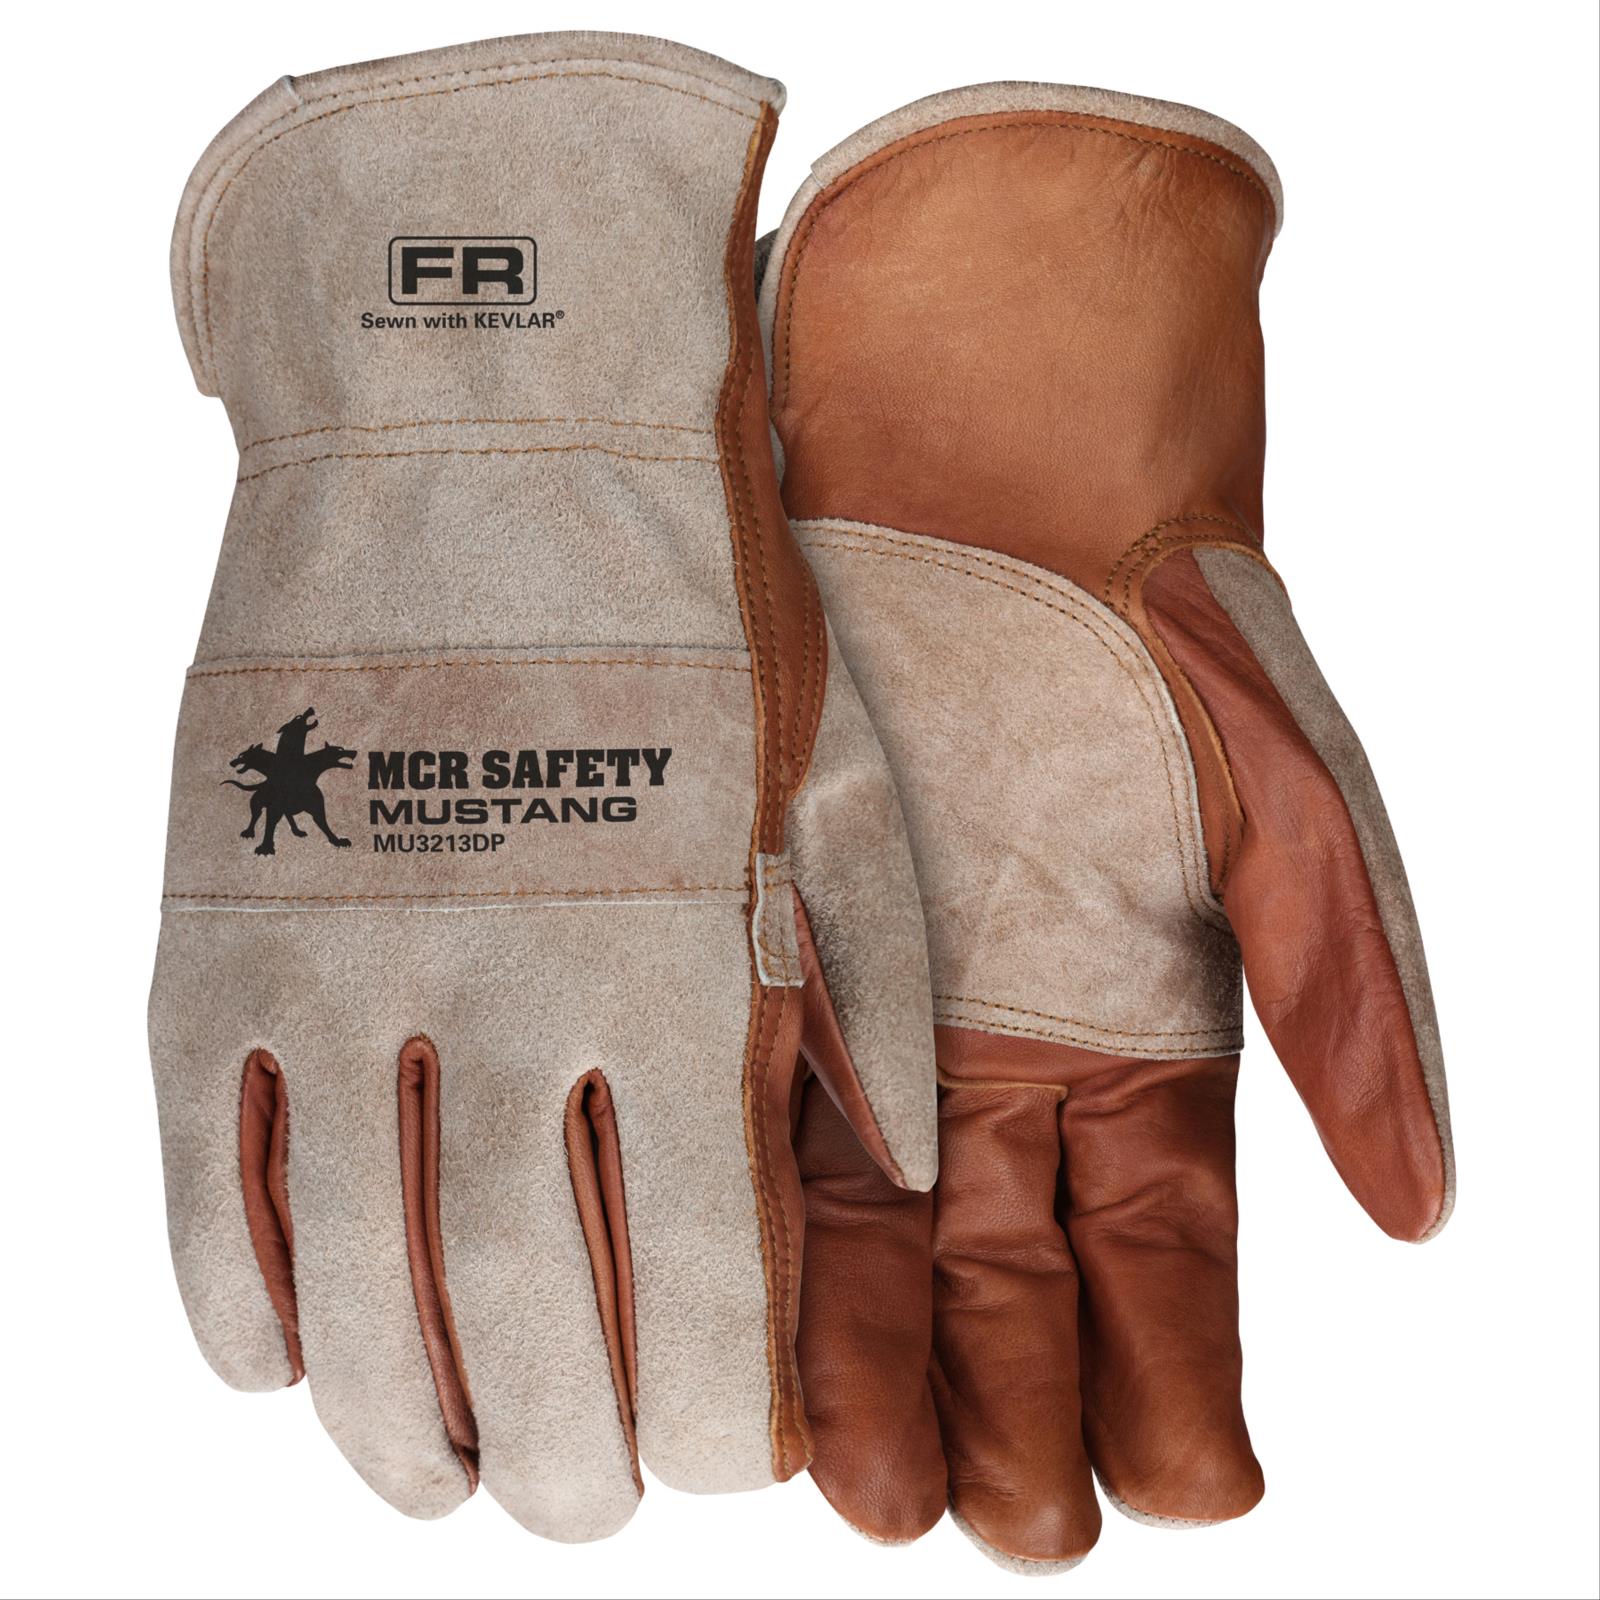 Mustang Utility Drivers Glove, Grain Cow Double Palm